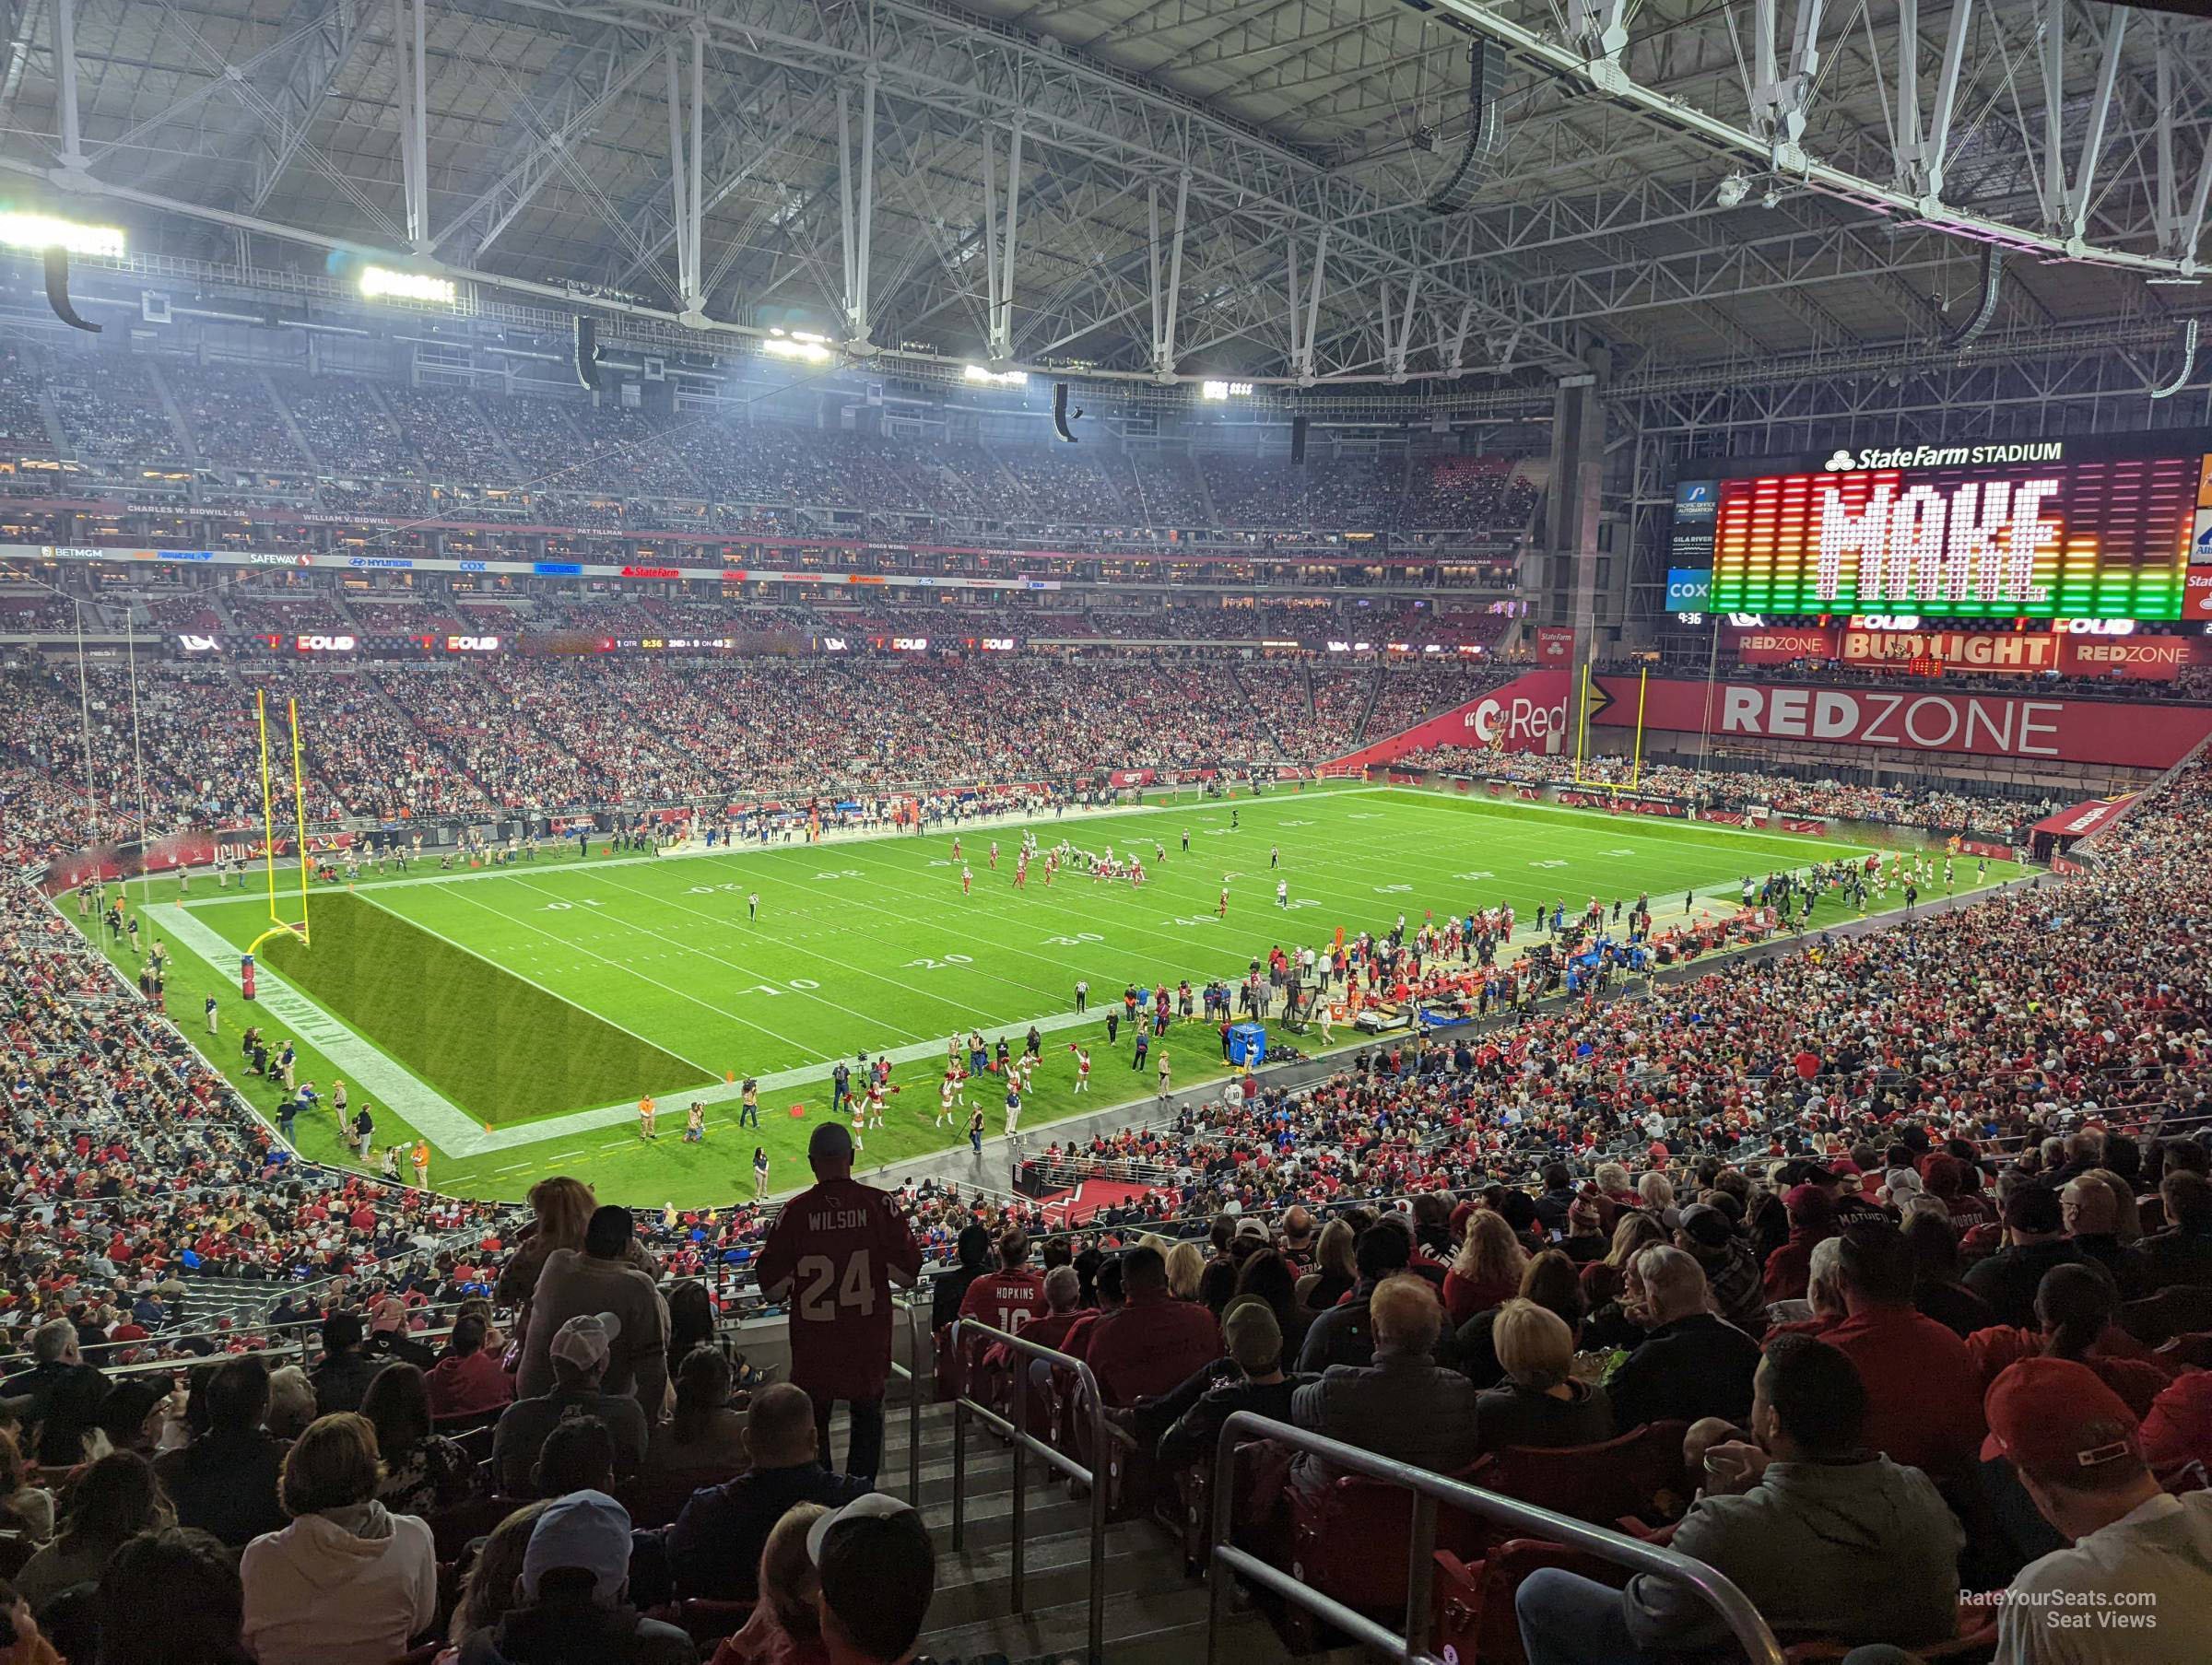 section 218, row 12 seat view  for football - state farm stadium